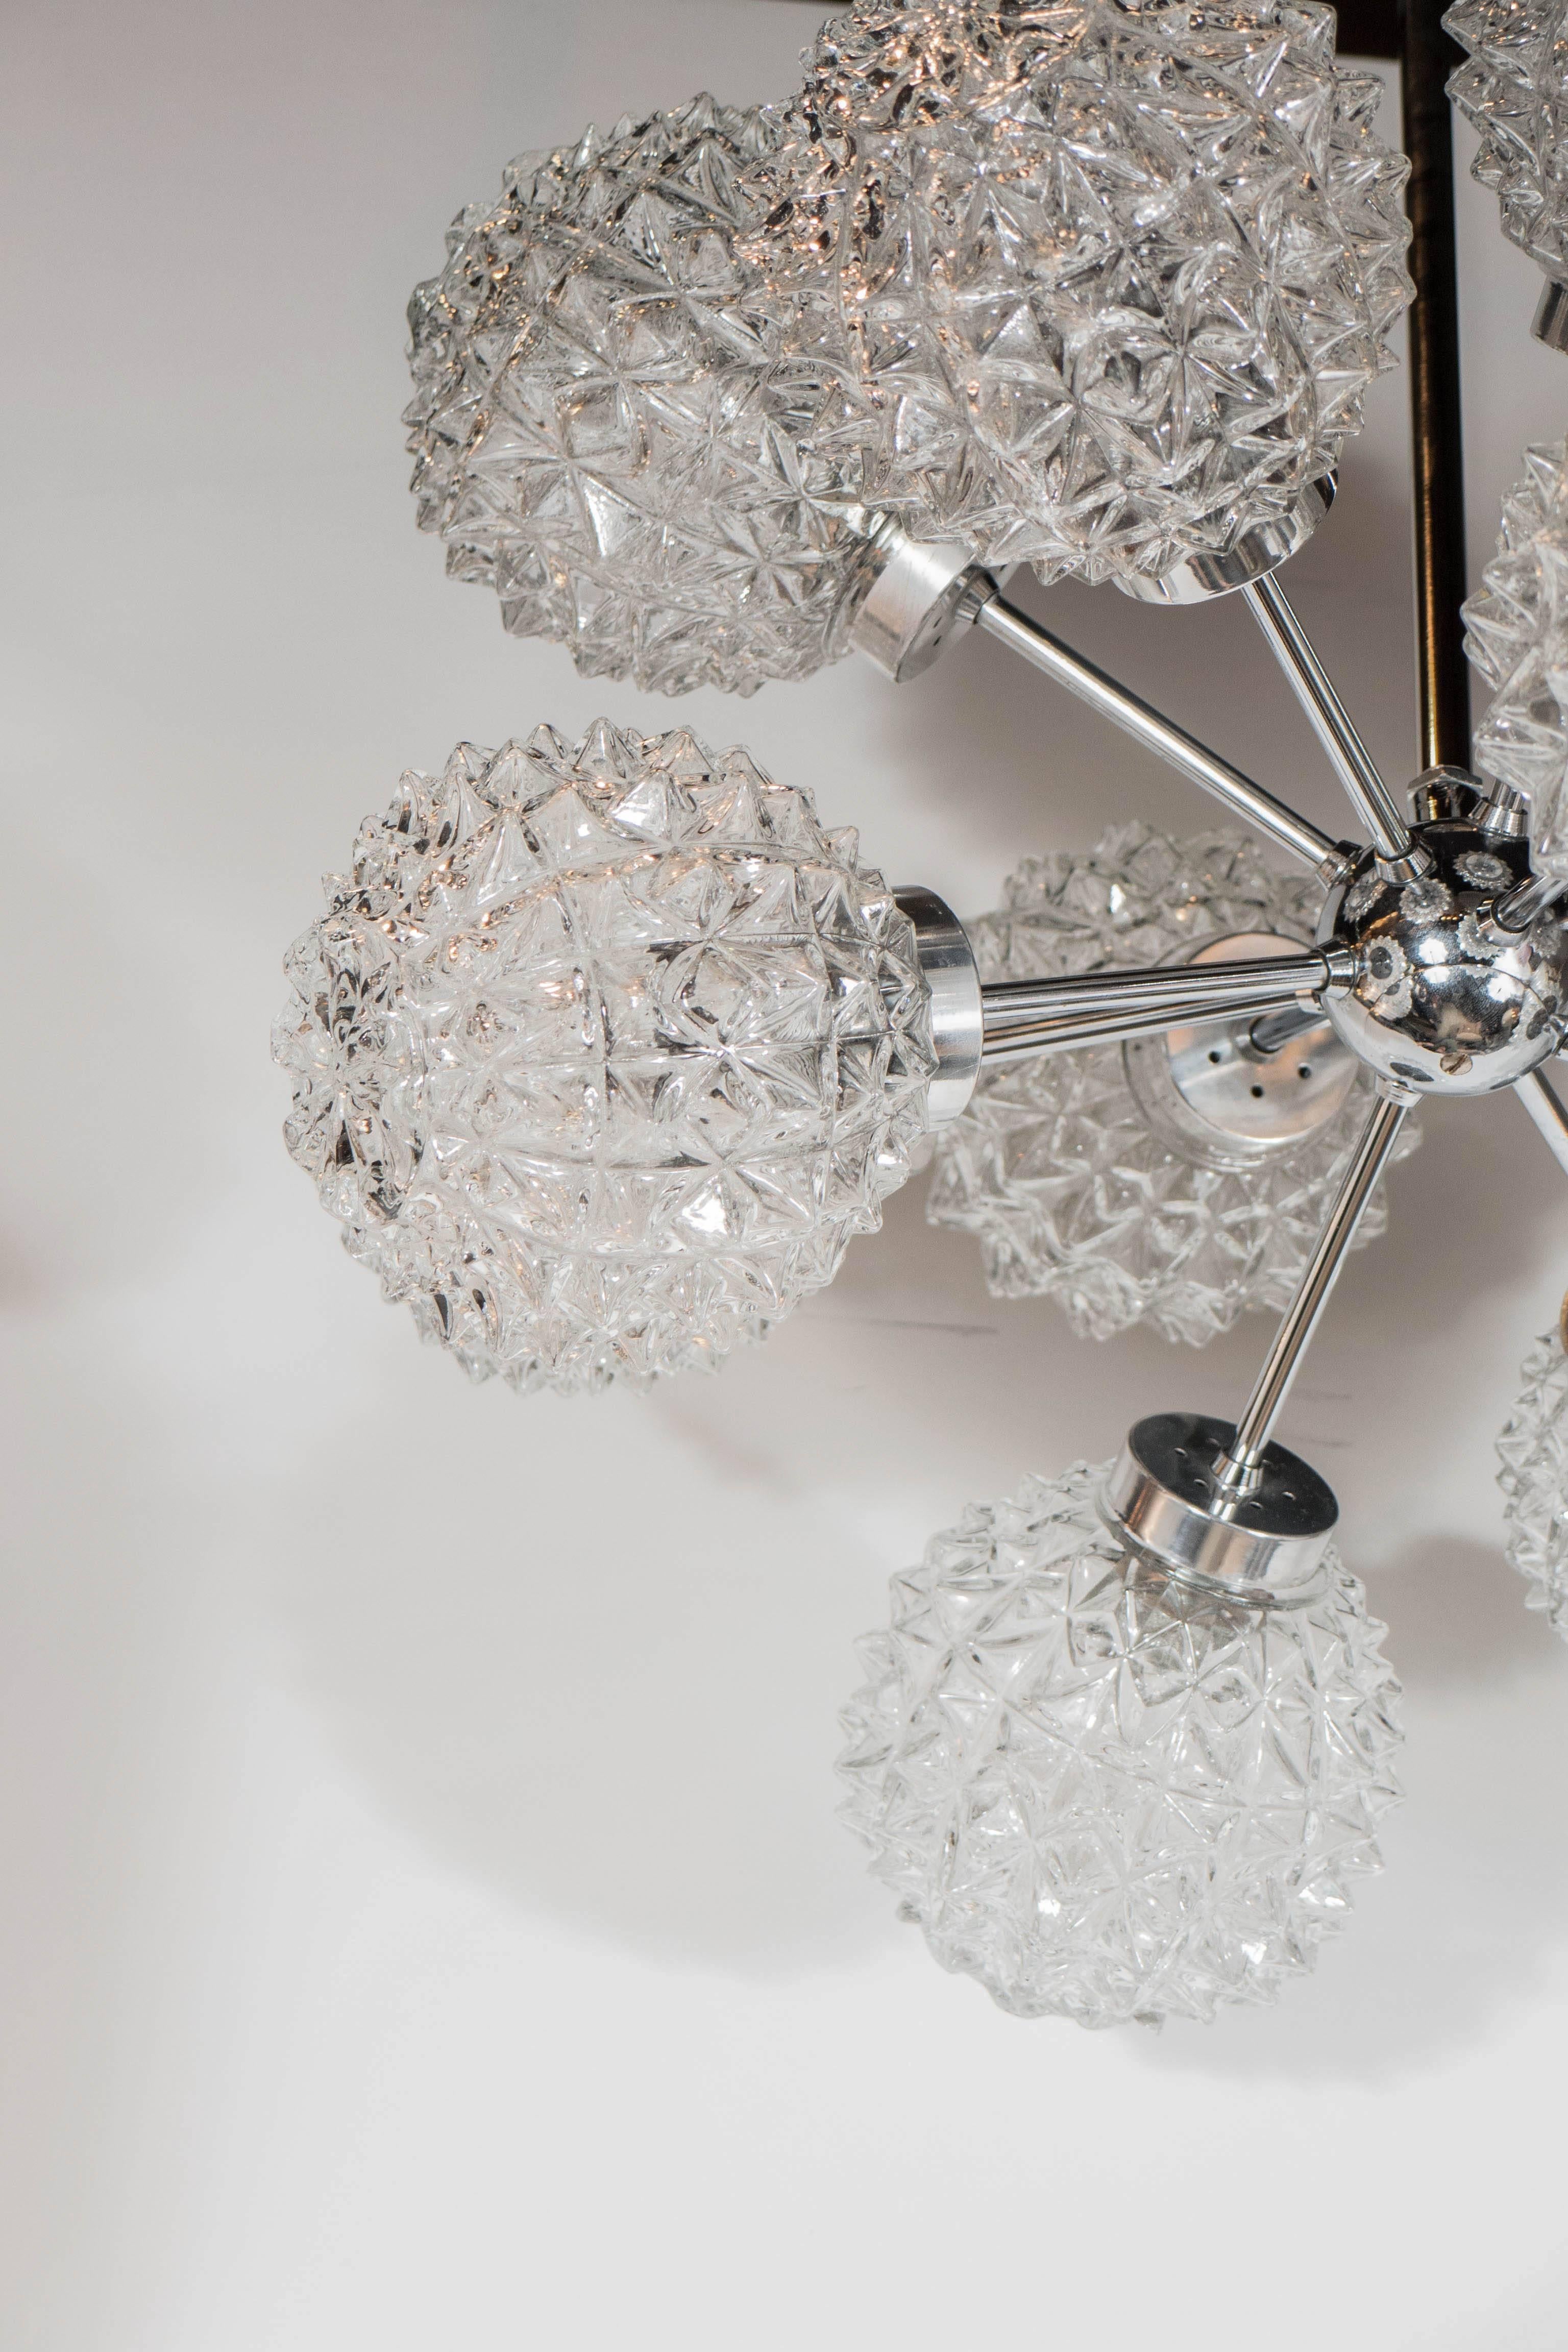 This stunning Mid-Century Modernist twelve-arm Sputnik chandelier by Richard Essig consists of a chrome frame, a central sphere from which the rods emanate; each rod has a spherical glass globe with a deep faceted texture. It has been newly rewired